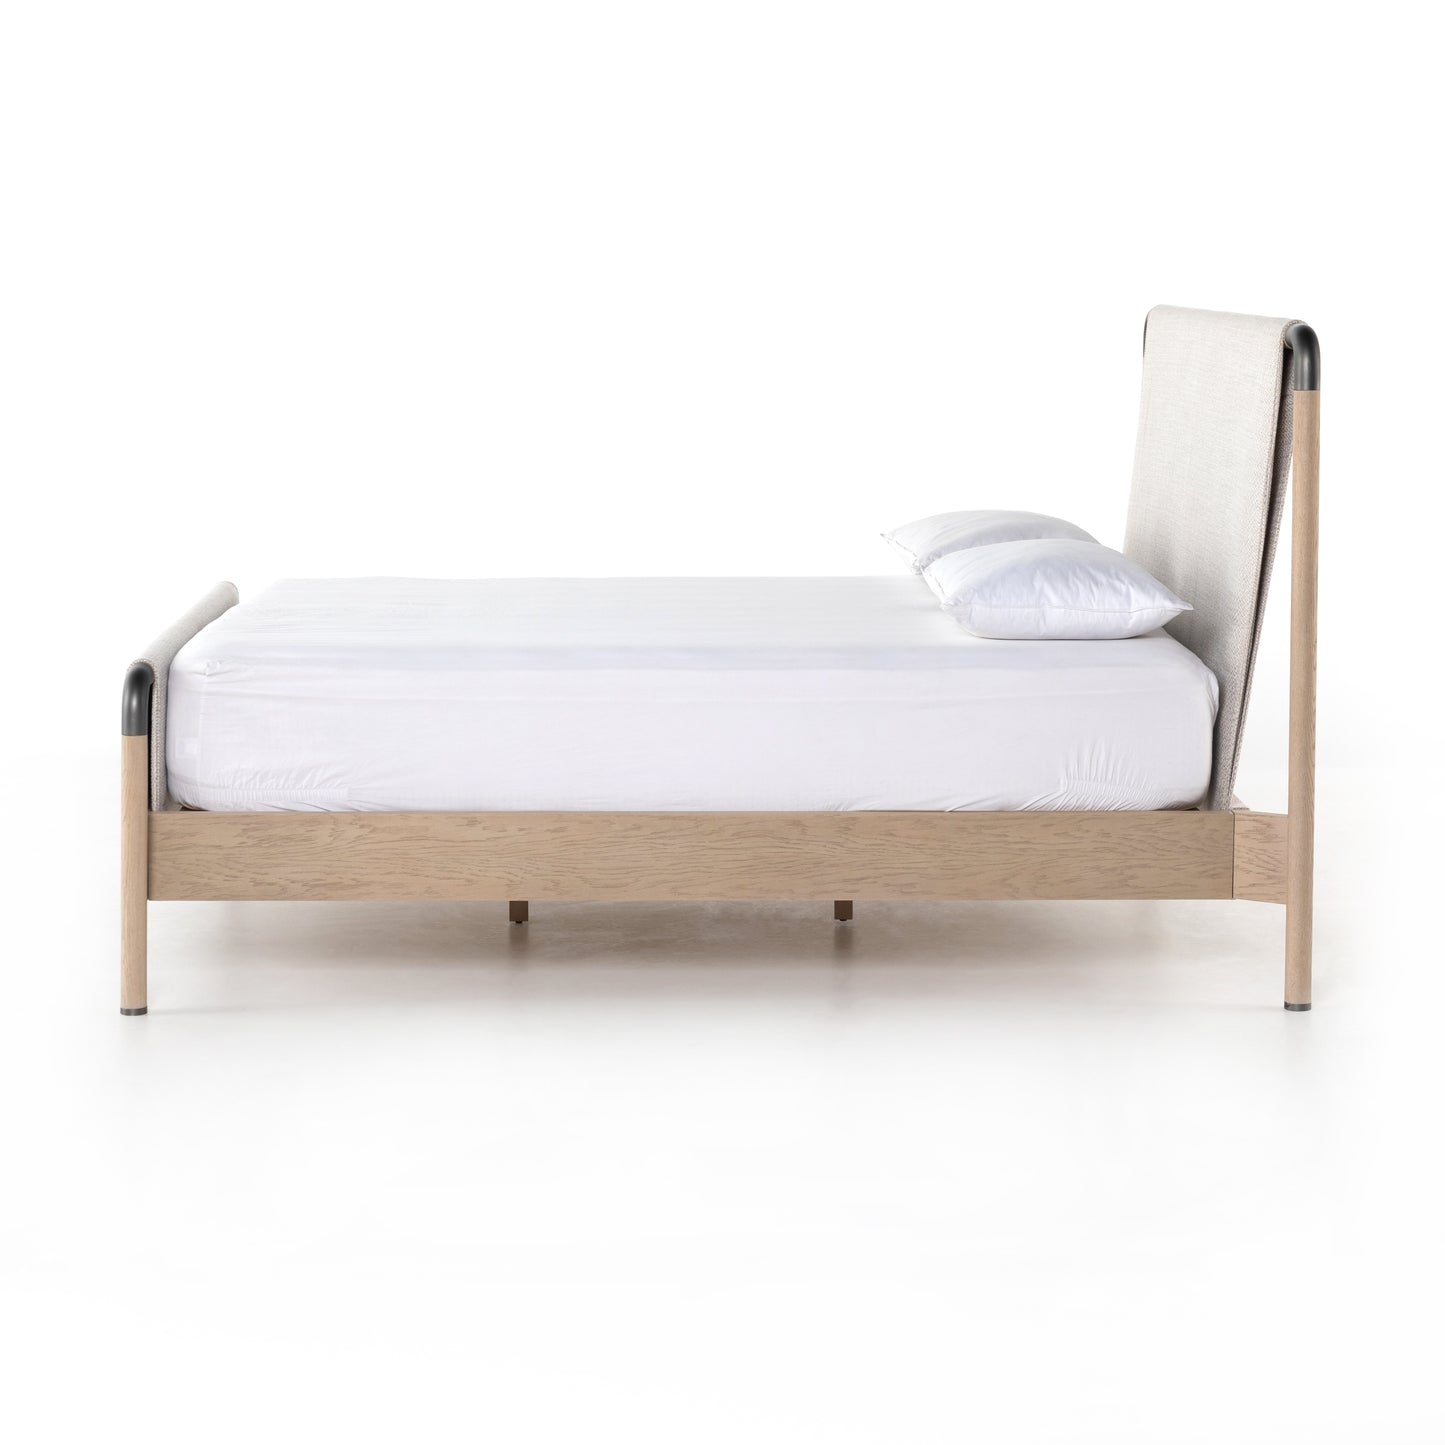 Load image into Gallery viewer, Harriett Bed Bed Four Hands     Four Hands, Mid Century Modern Furniture, Old Bones Furniture Company, Old Bones Co, Modern Mid Century, Designer Furniture, https://www.oldbonesco.com/
